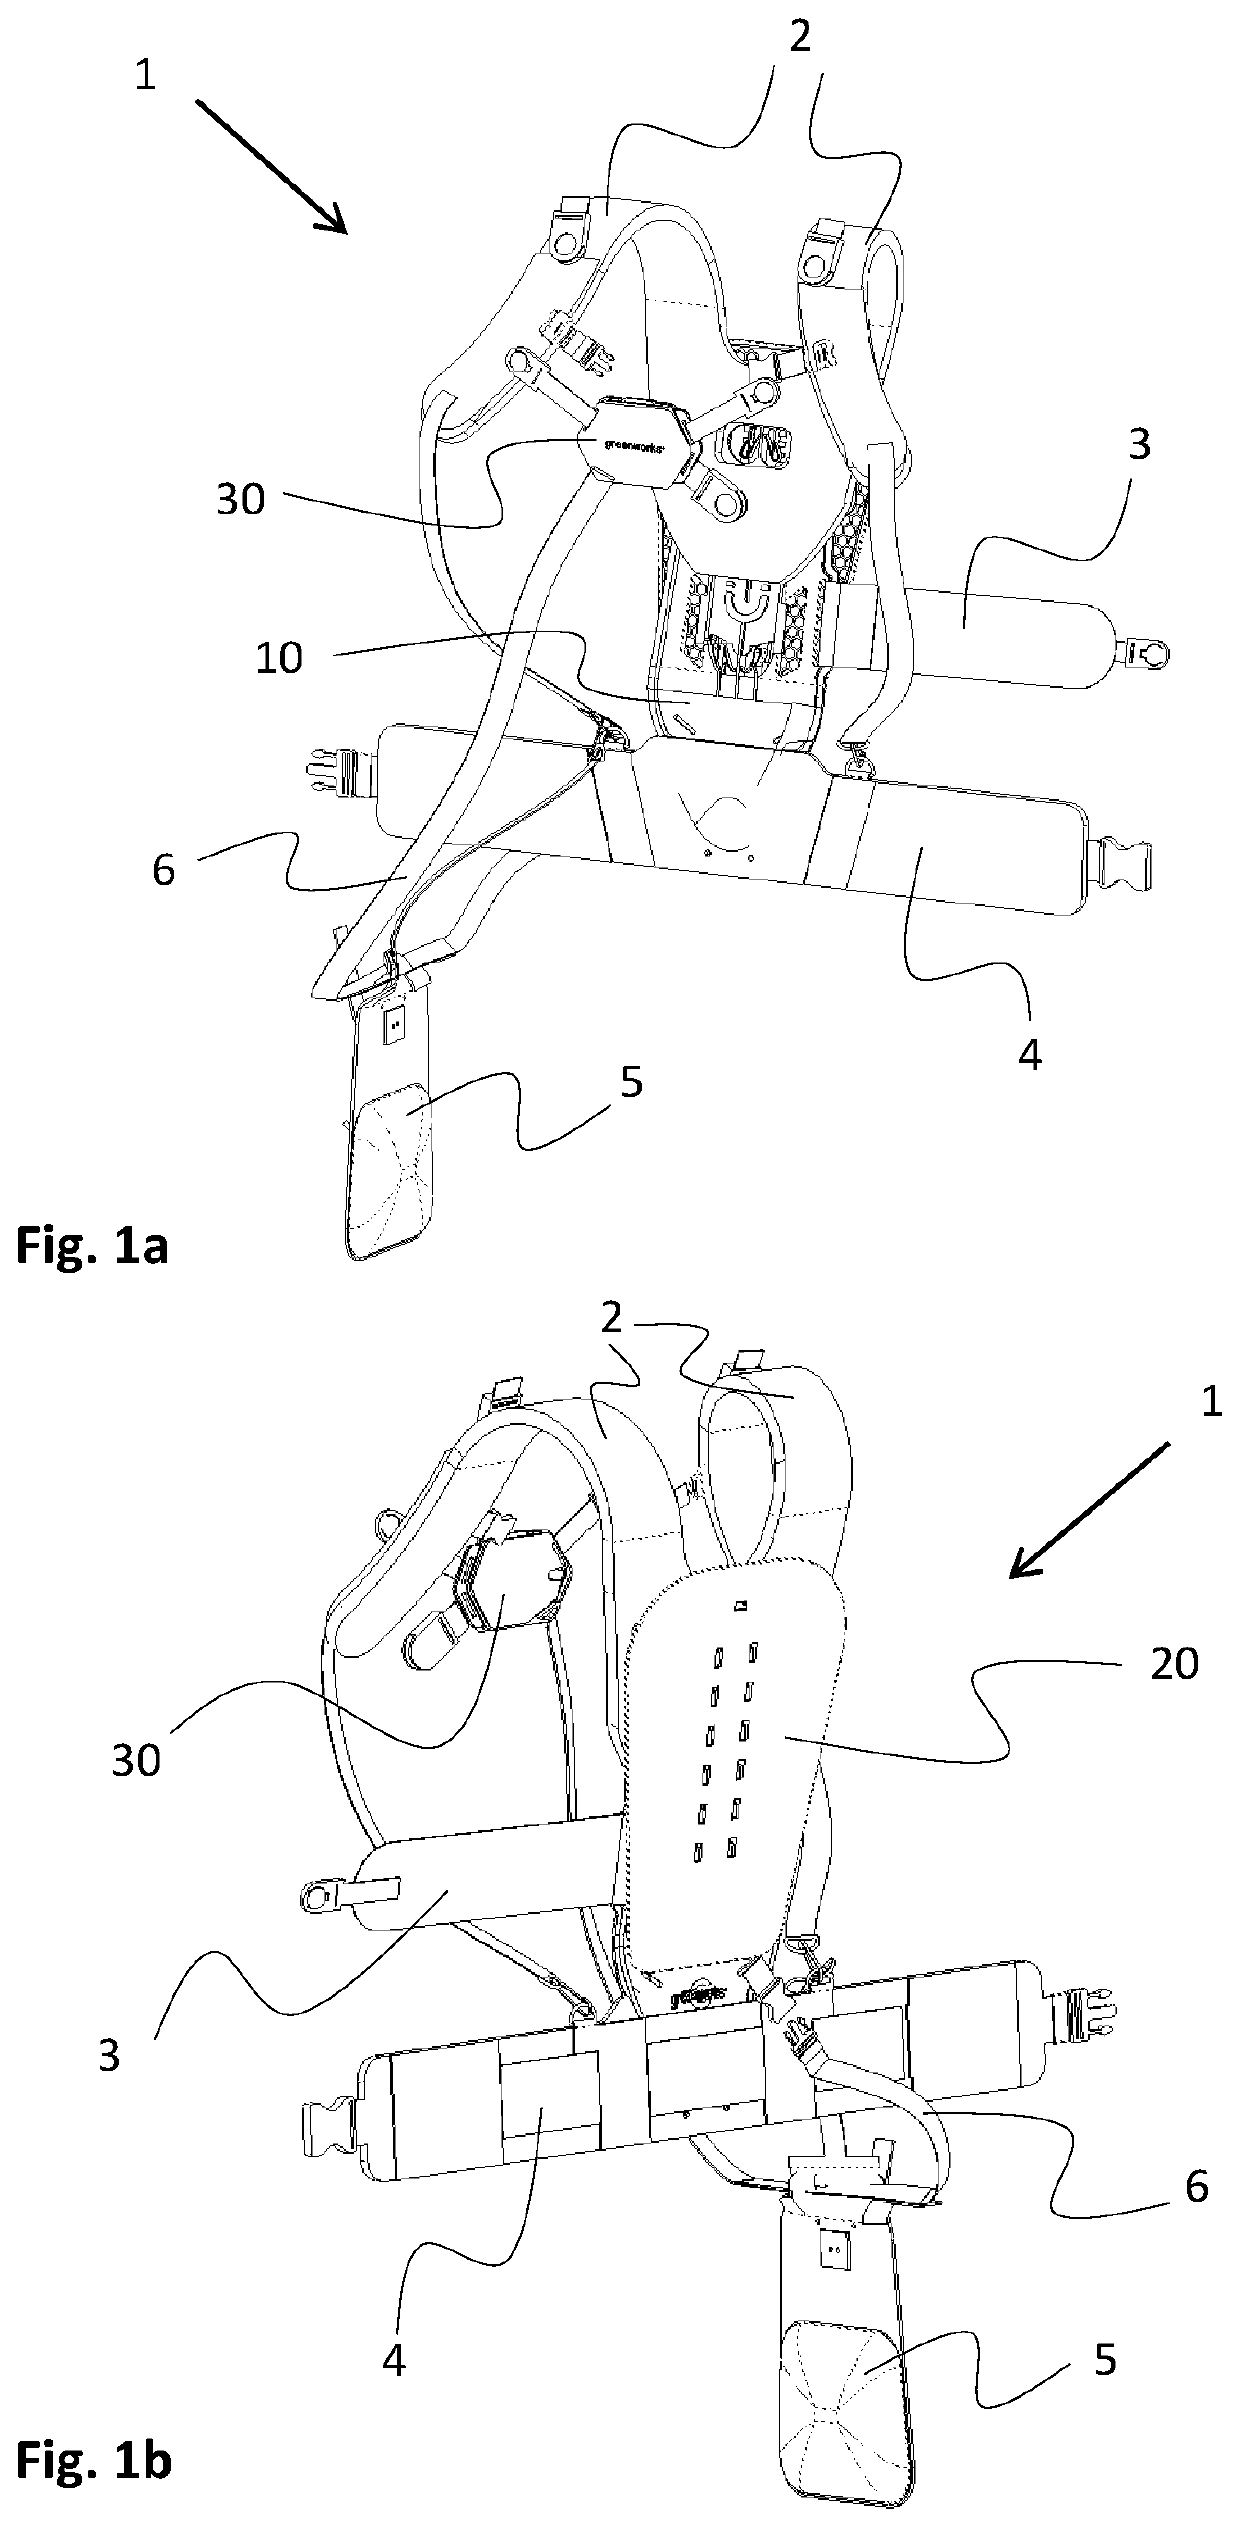 Adjustable carrier assembly for a harness